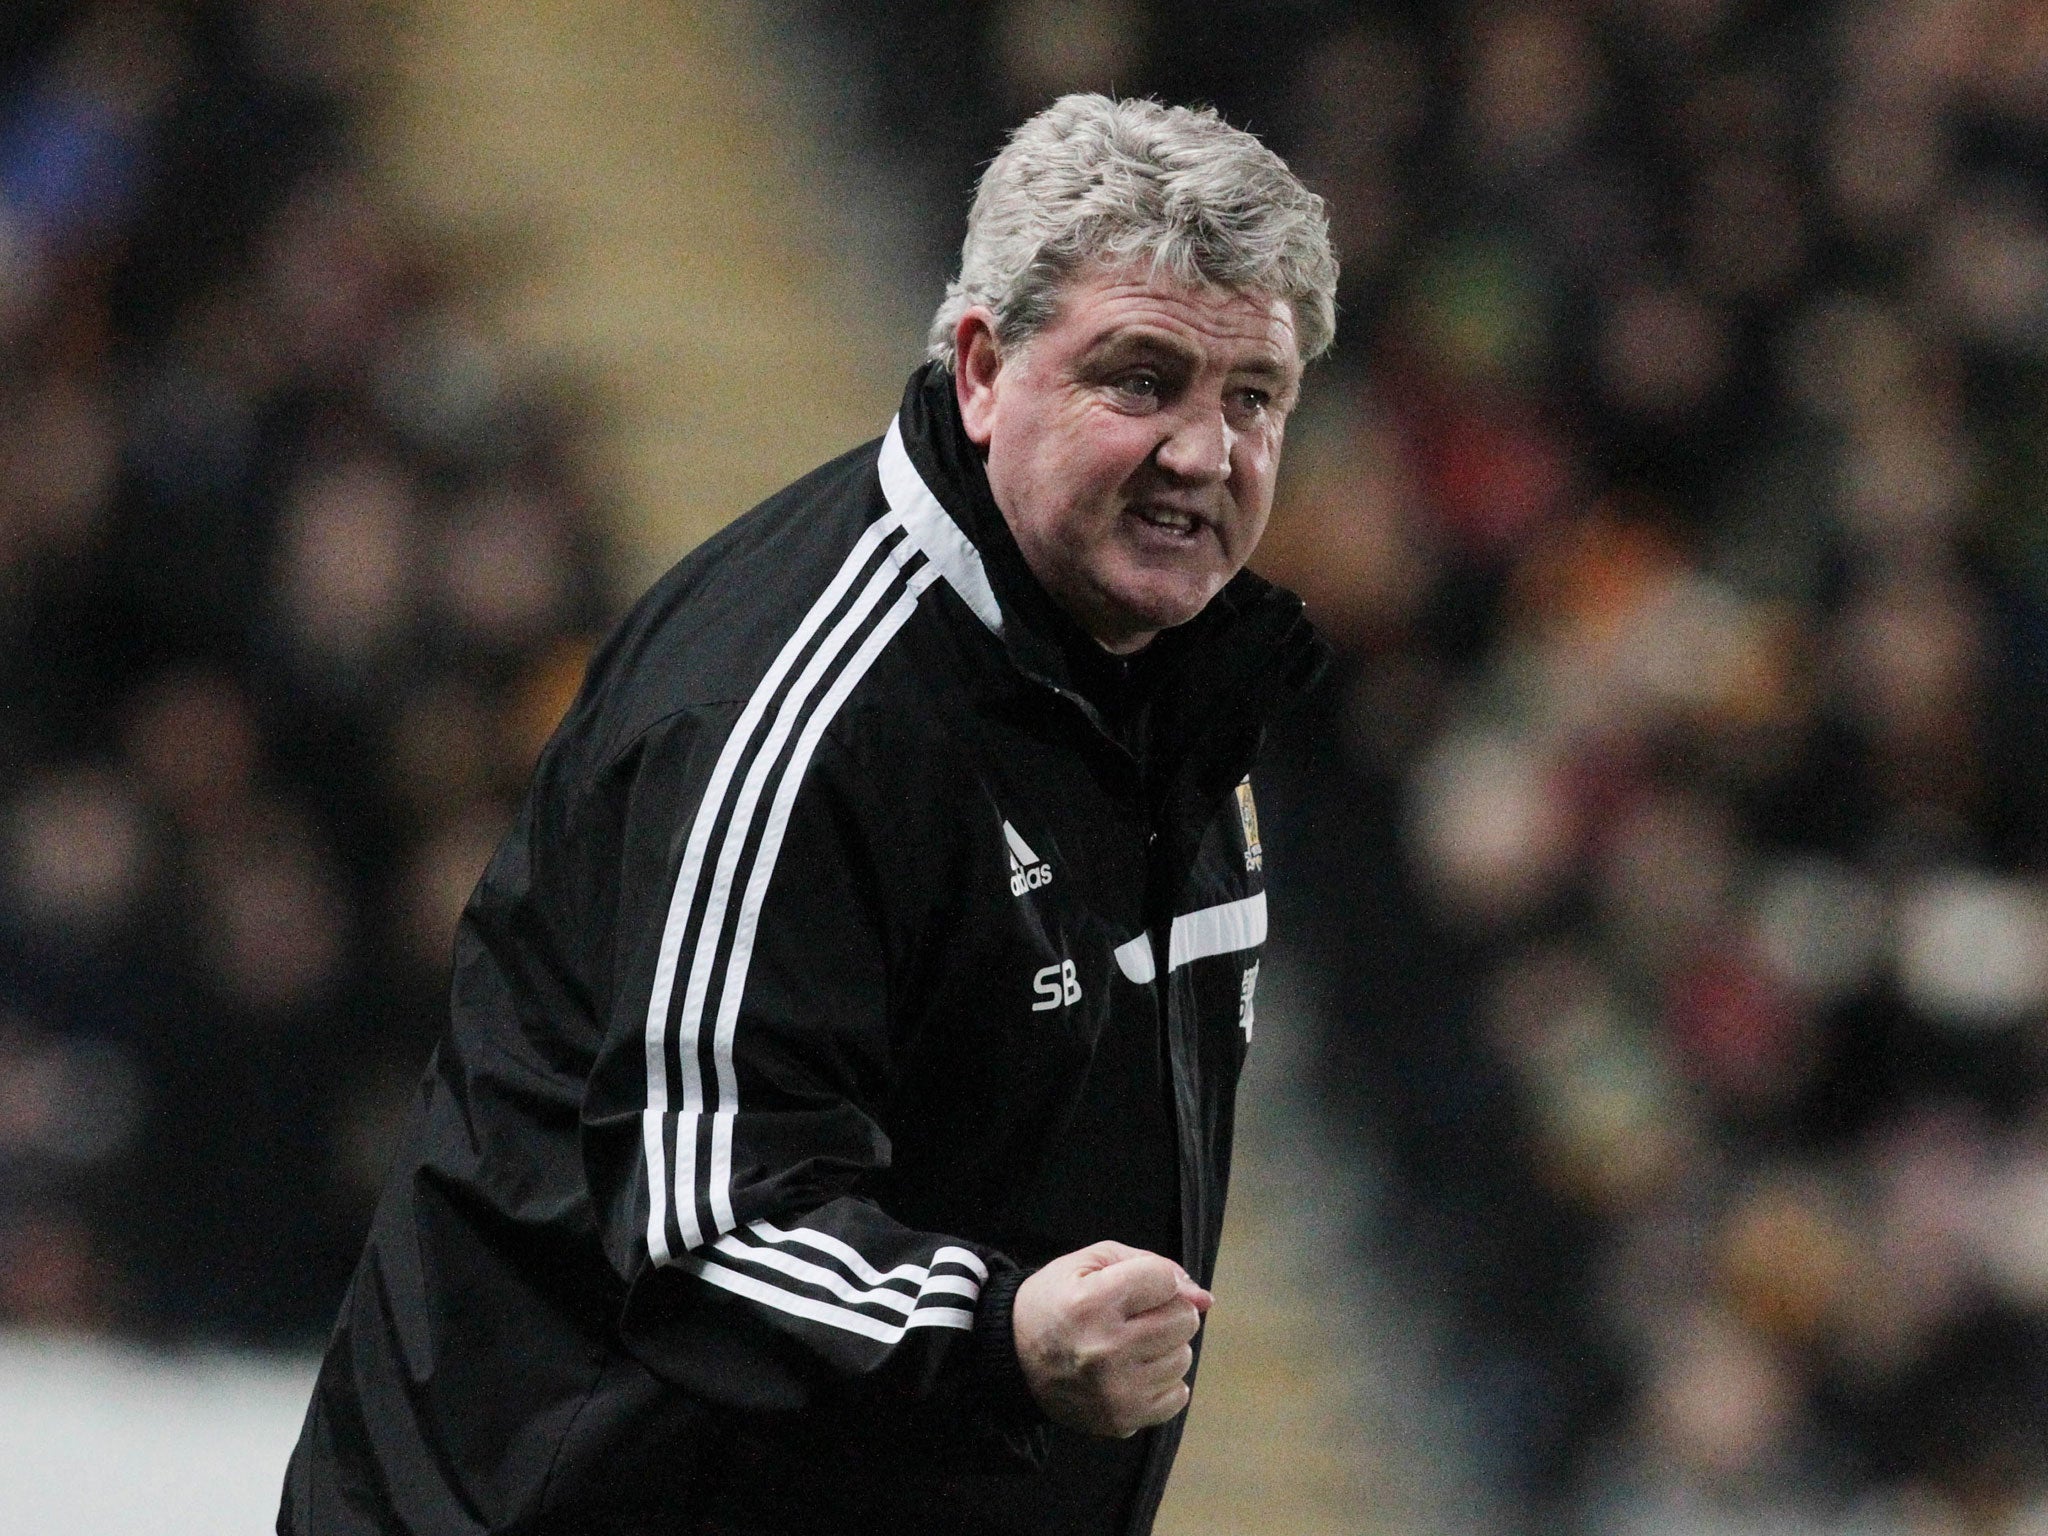 Steve Bruce makes a gesture form the touchline